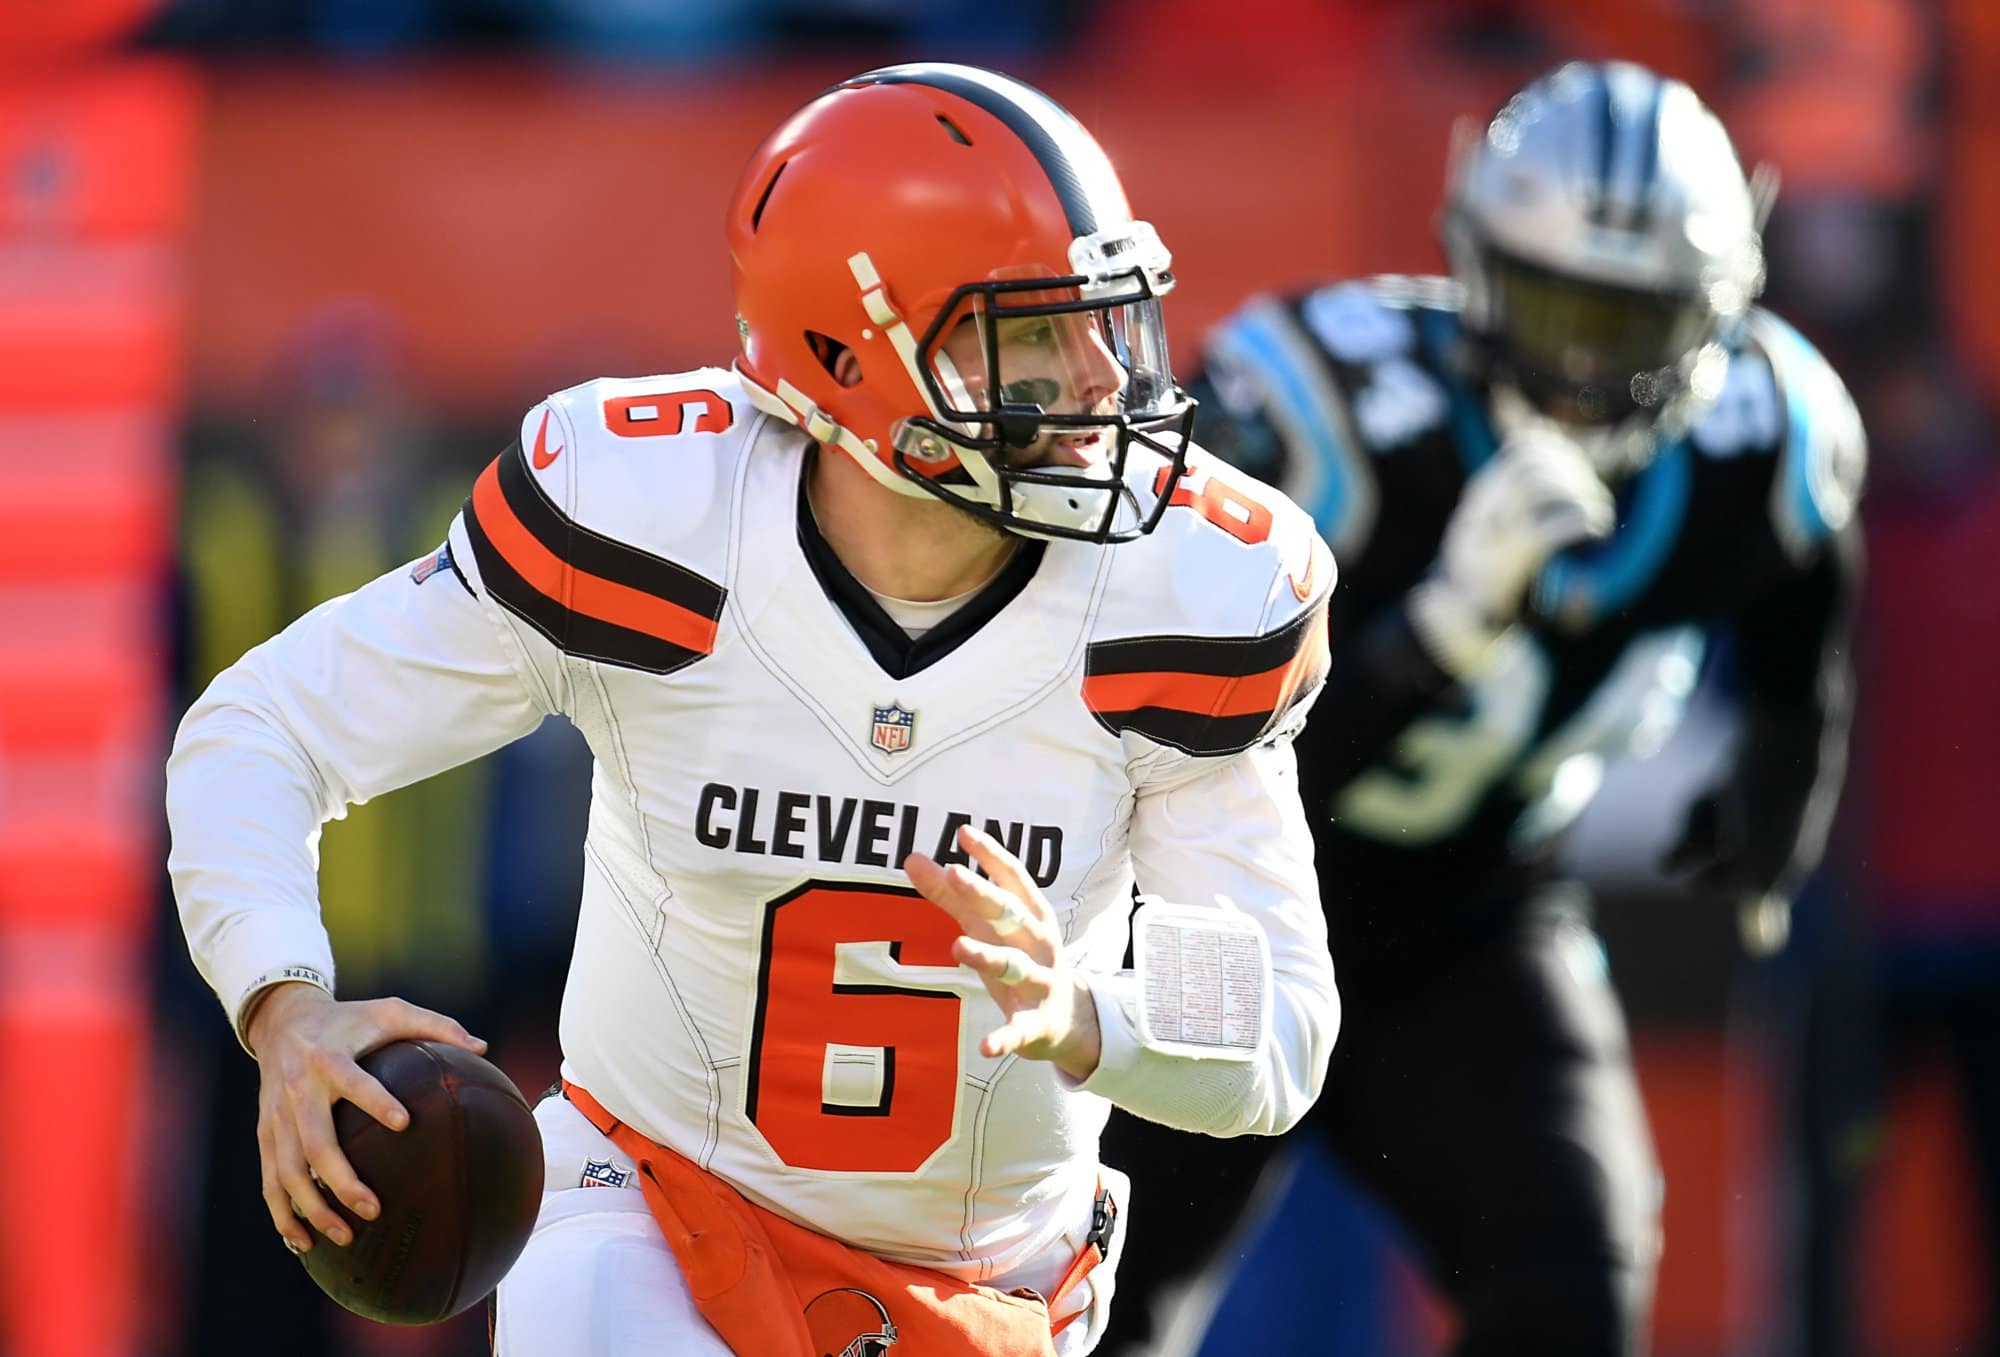 CLEVELAND, OH - DECEMBER 09:  Baker Mayfield #6 of the Cleveland Browns looks to pass during the first quarter against the Carolina Panthers at FirstEnergy Stadium on December 9, 2018 in Cleveland, Ohio. (Photo by Jason Miller/Getty Images)